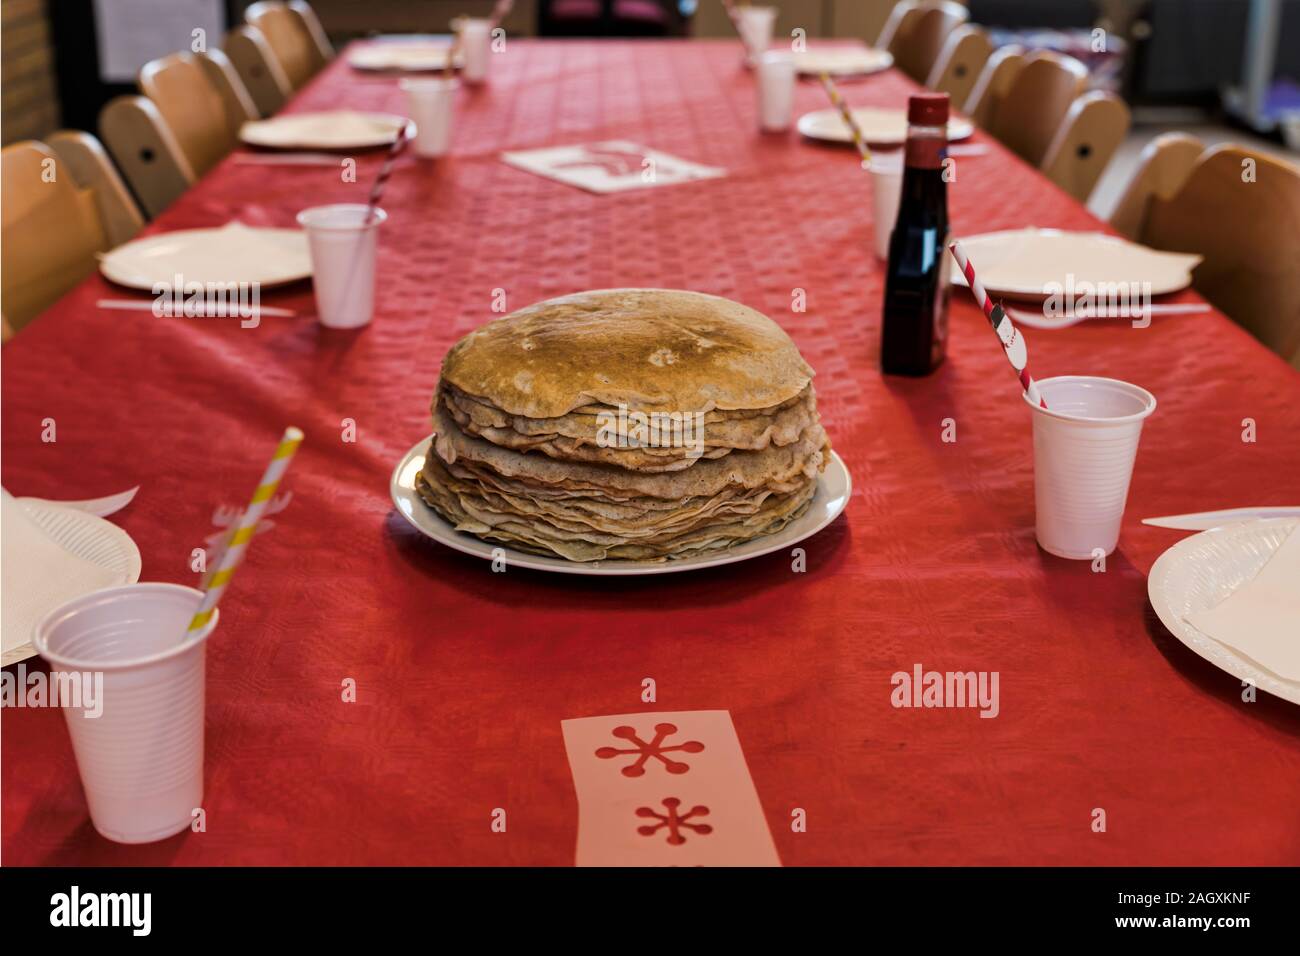 set table with a plate with a stack of pancakes on a red tablecloth with cups for drinks Stock Photo